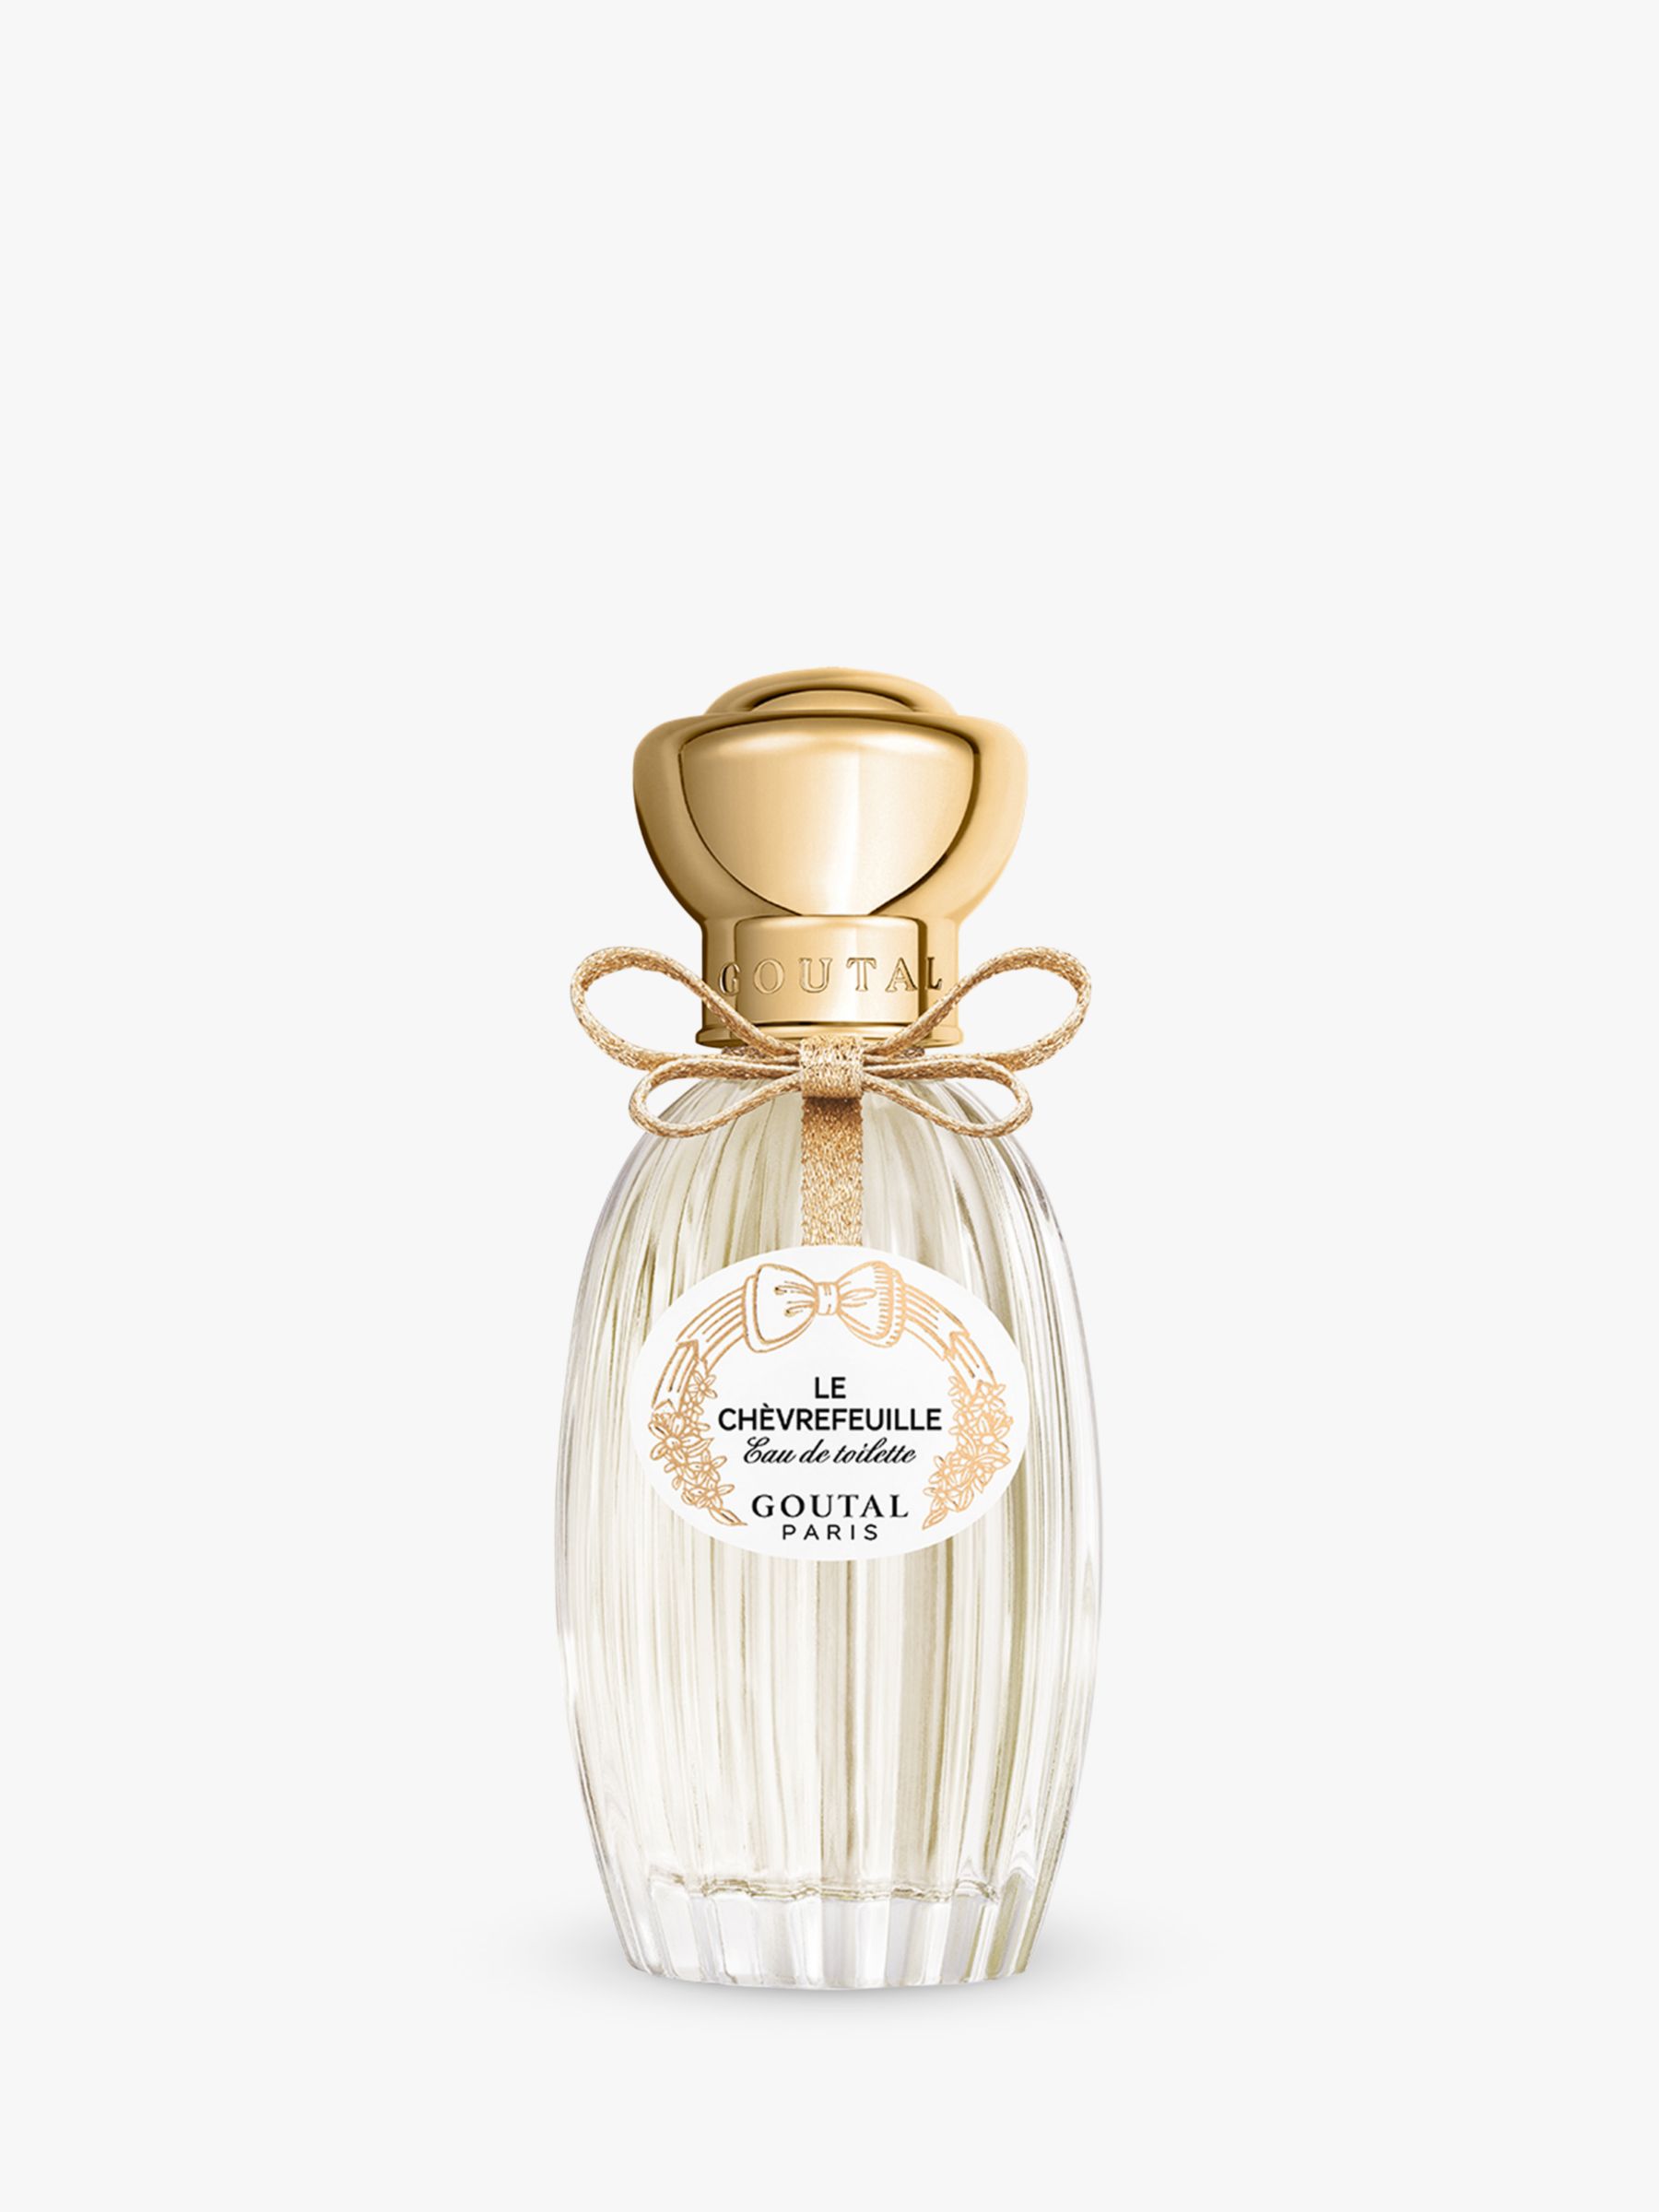 Le Chevrefeuille Goutal perfume - a fragrance for women 2002